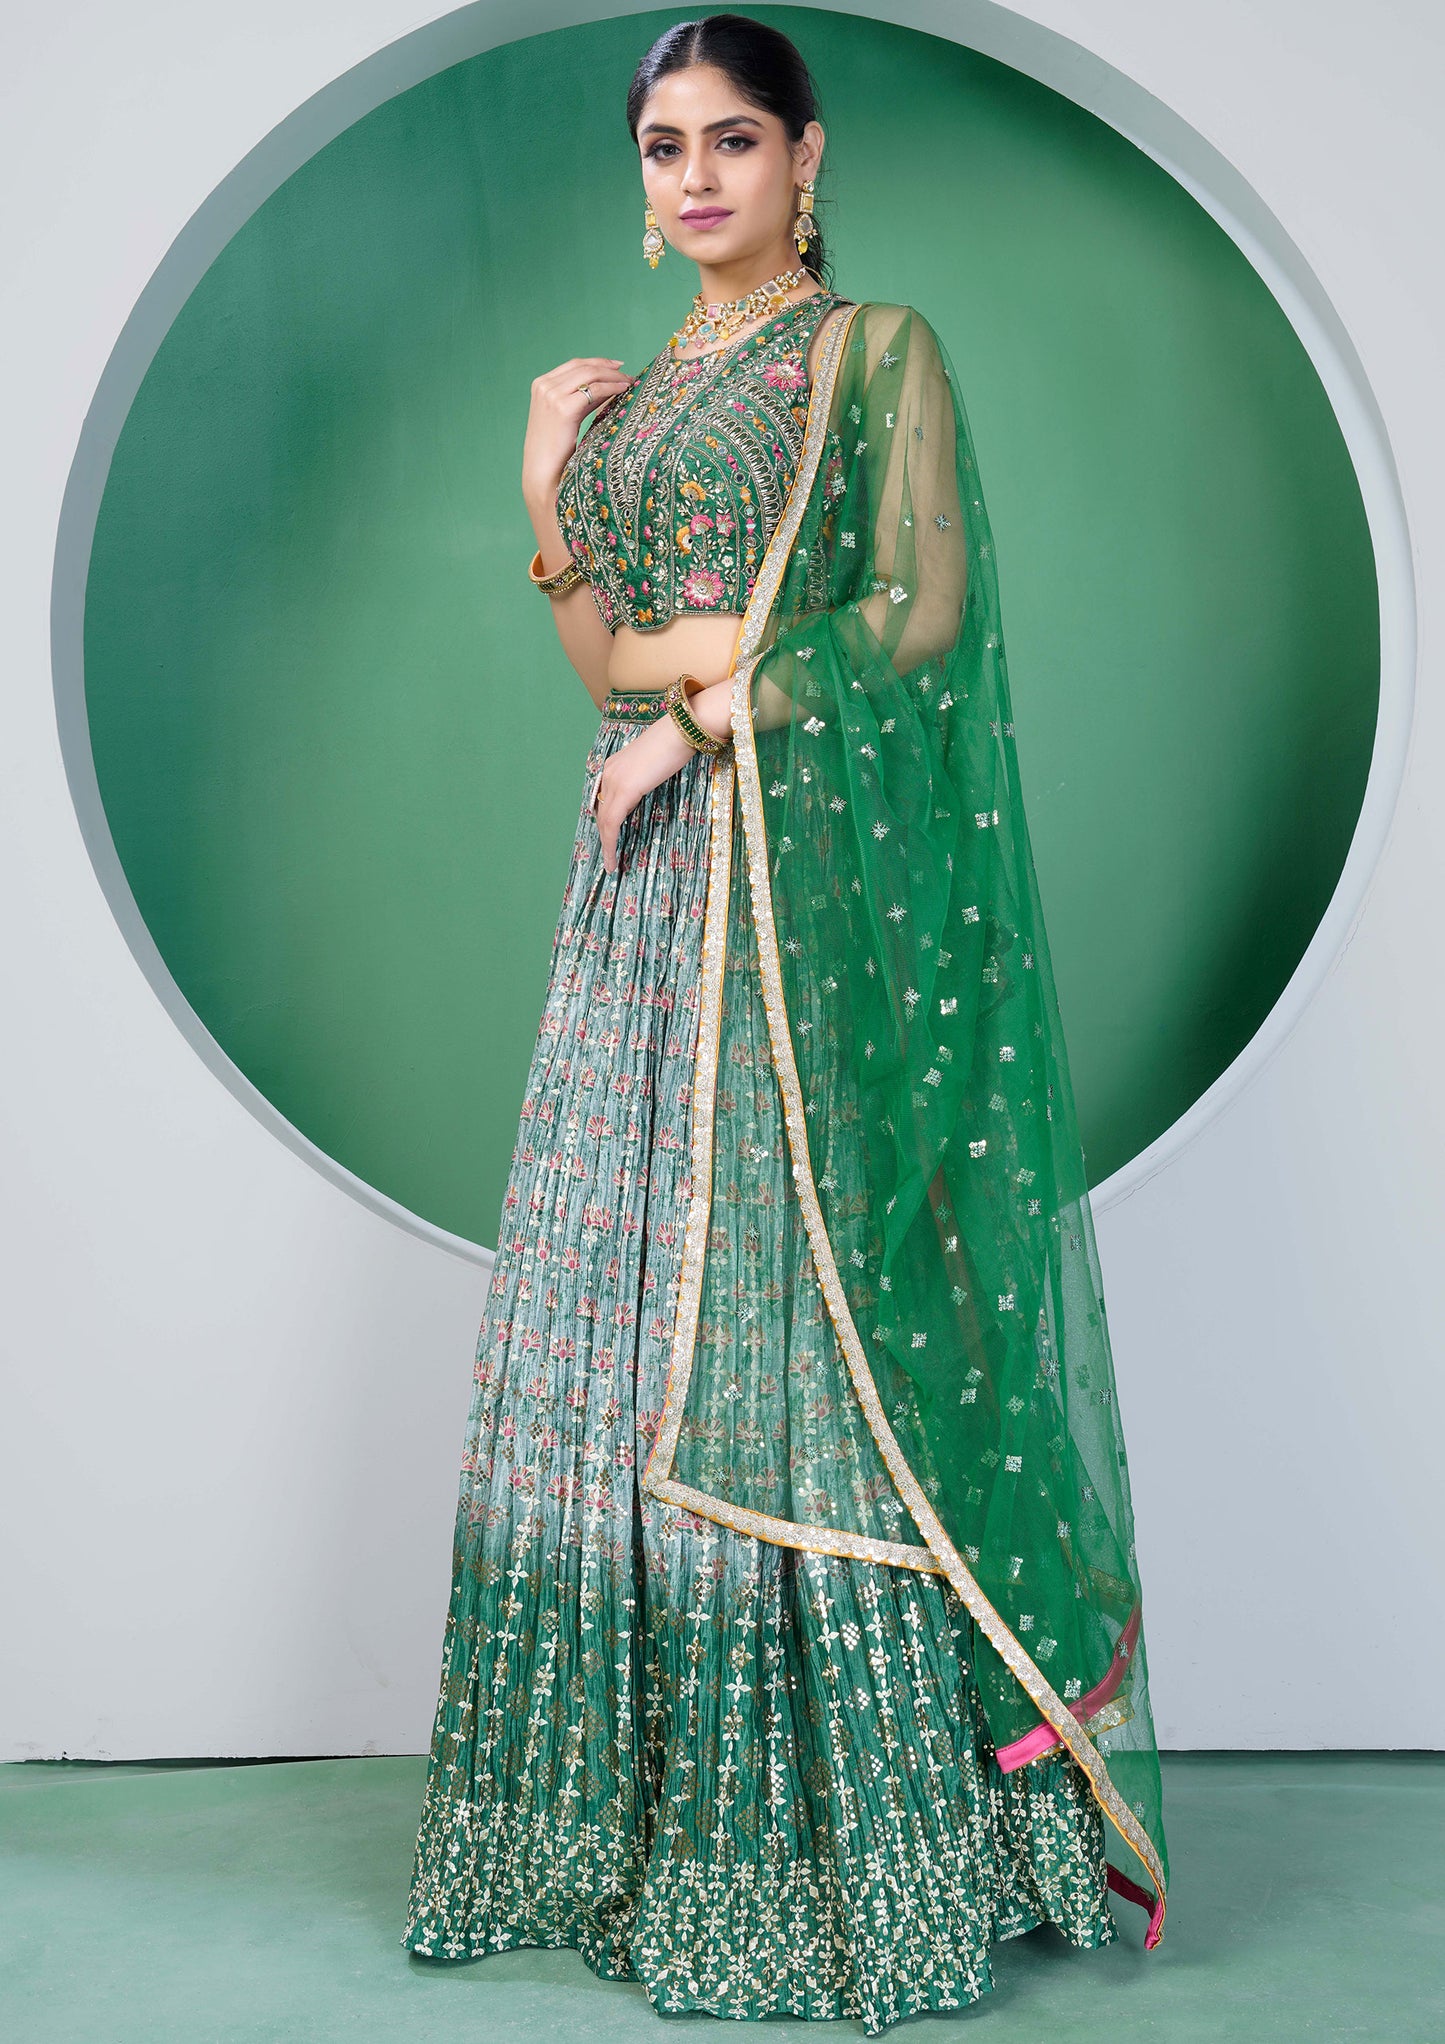 A beautiful green and gold embroidered lehenga choli, a traditional Indian outfit for women.